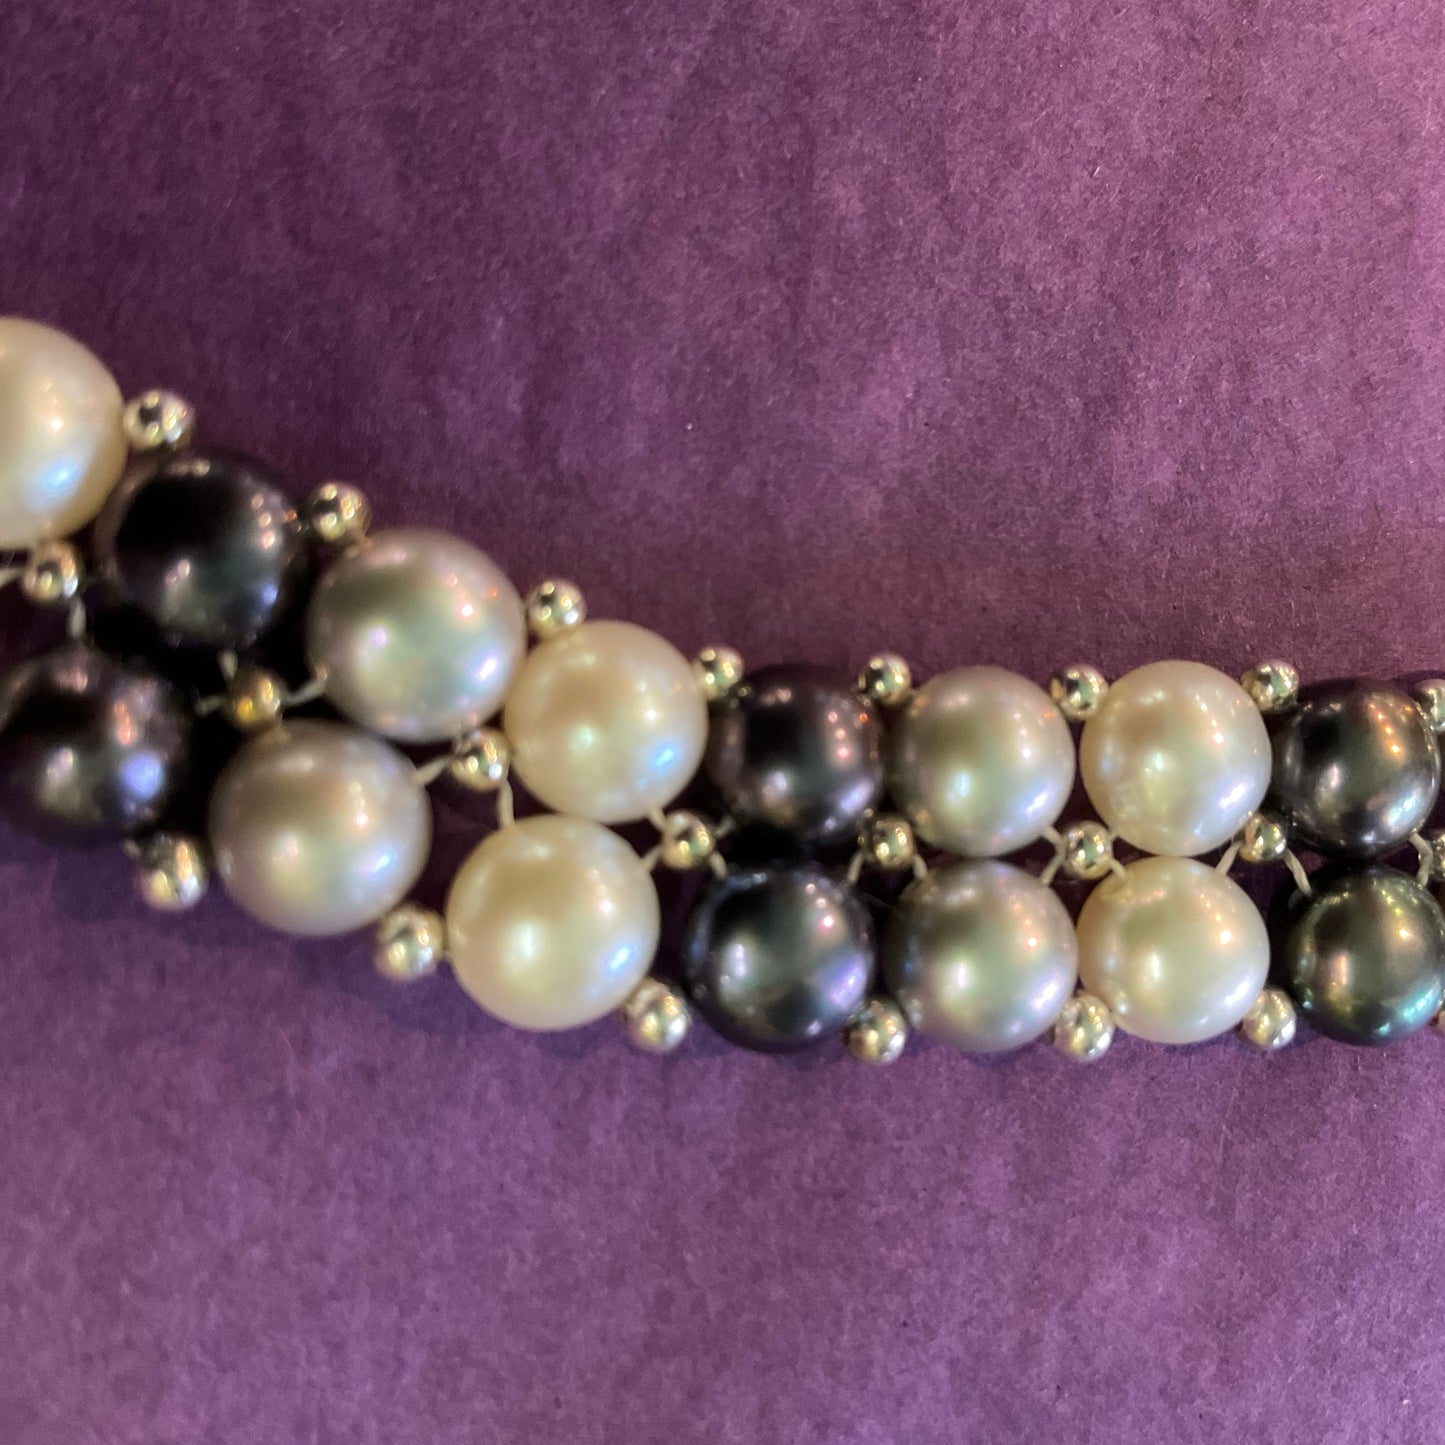 Vintage fresh water pearl monotone beaded necklace, silver (925) clasp, ivory, silver, purple, prom